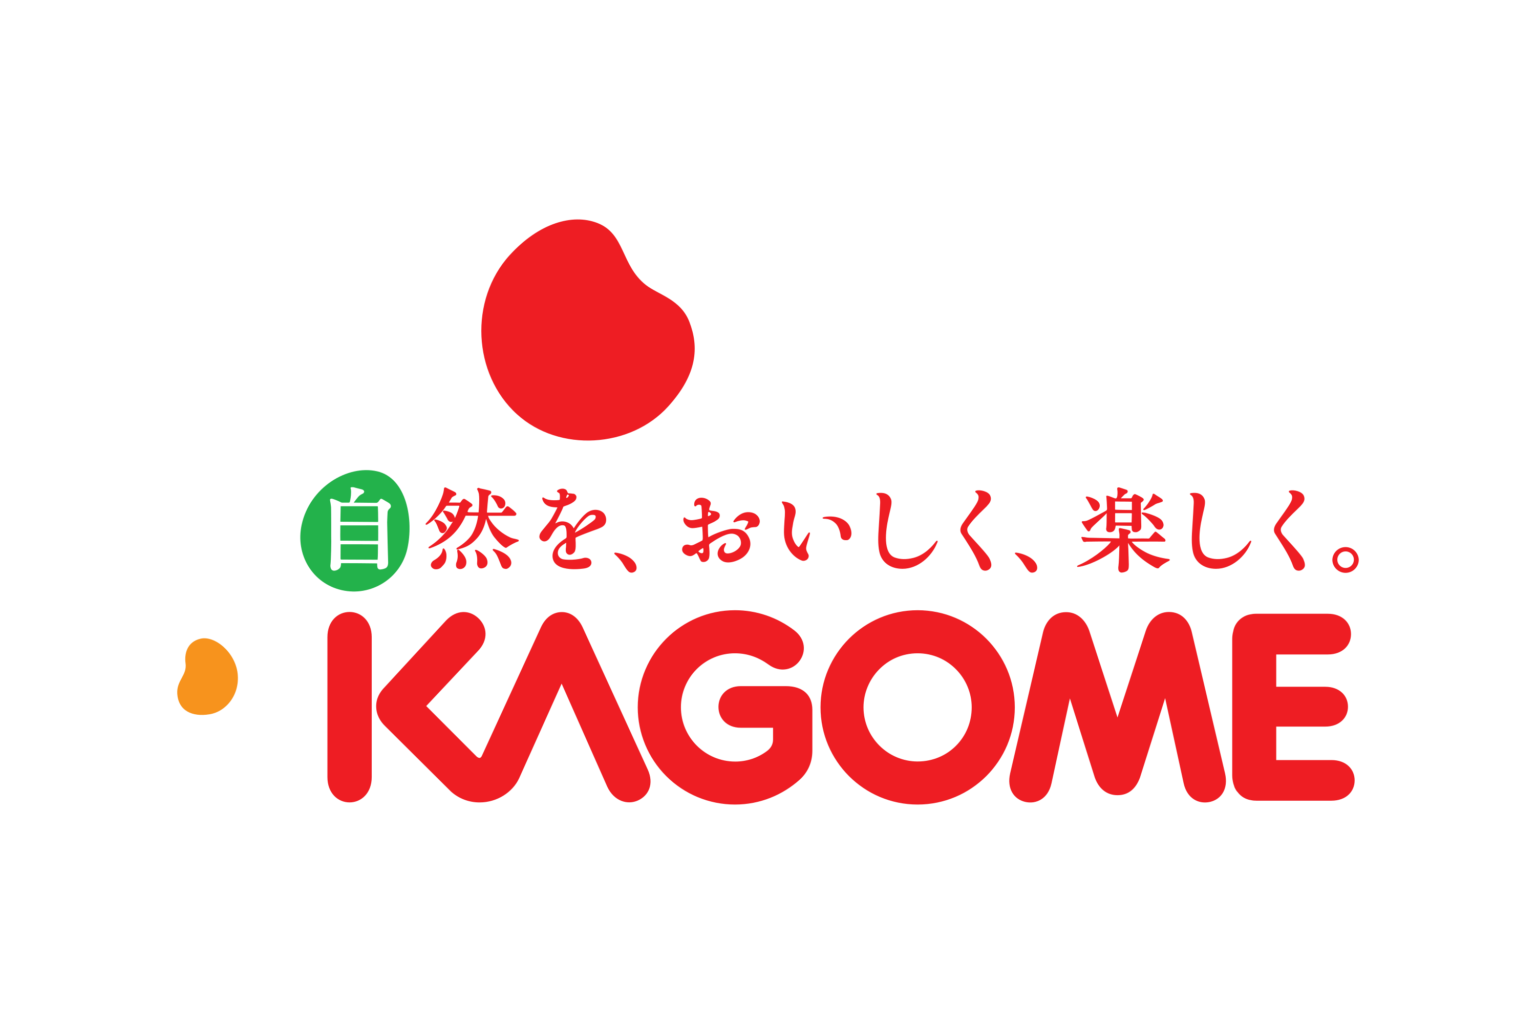 Brand Name : Kagome is world's largest tomato solution provider & manufacturing company.